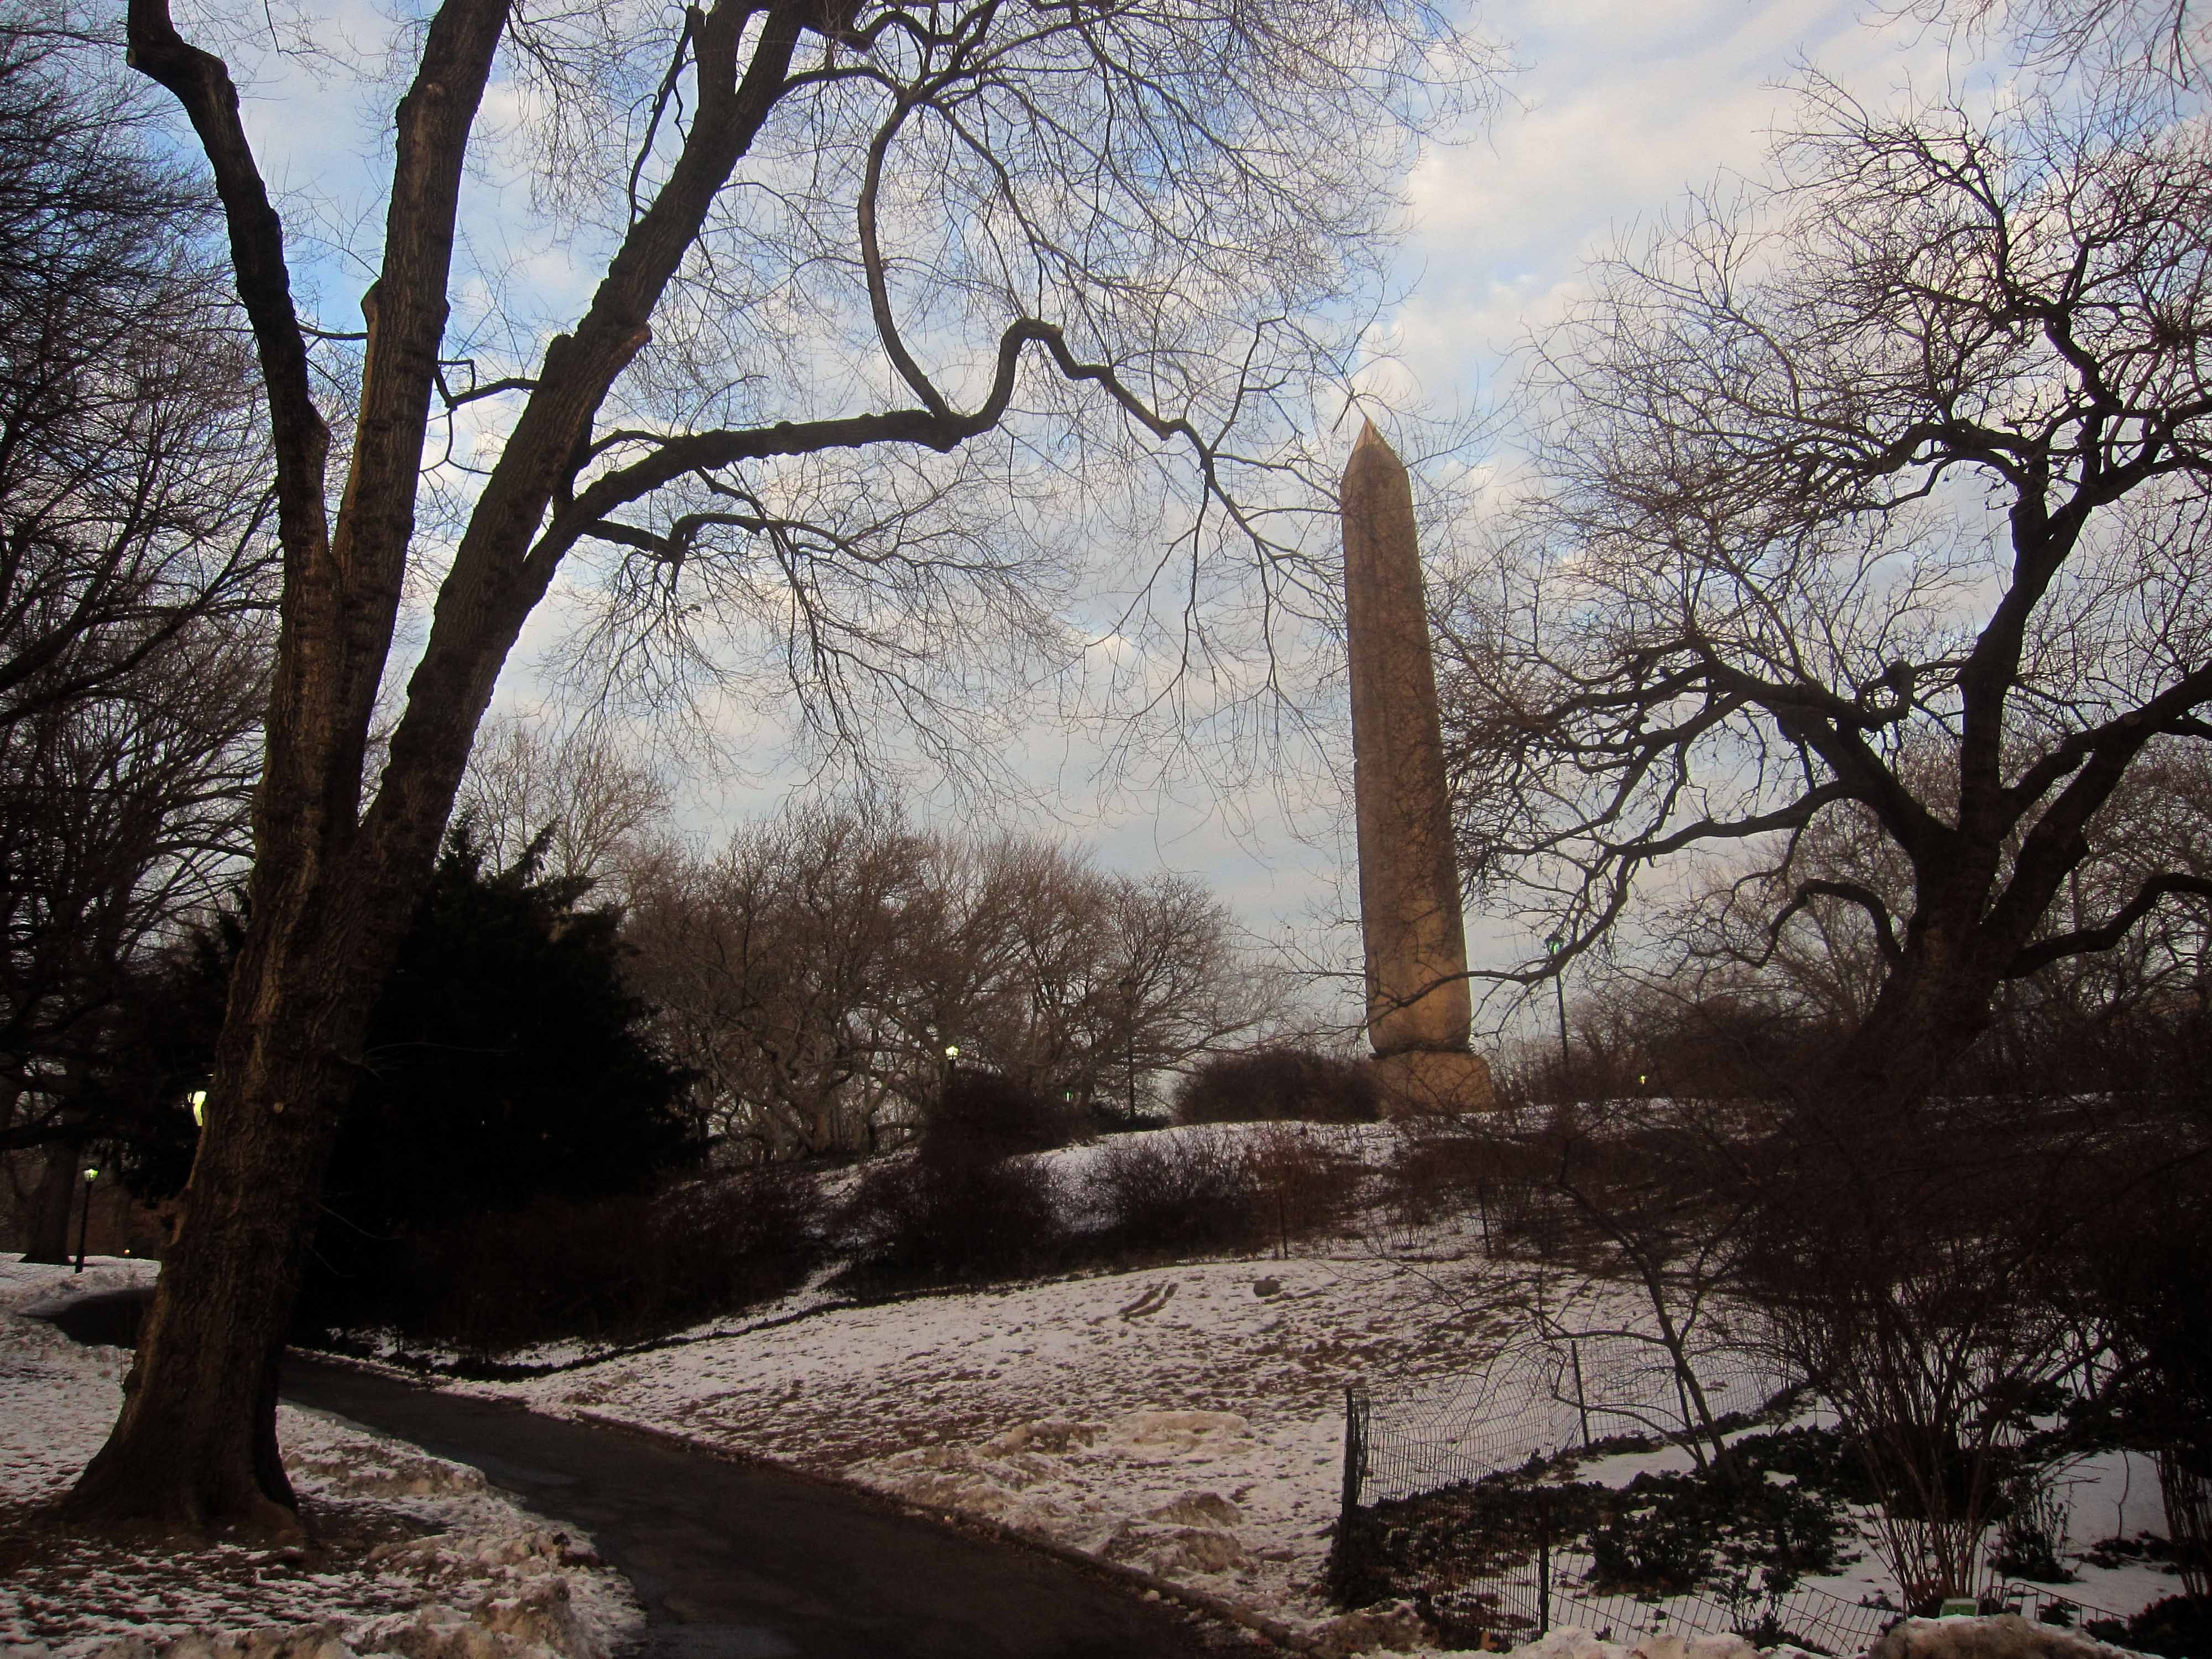 Cleopatra's Needle - Central Park Obelisk Statue with Crabs - Atlas Obscura